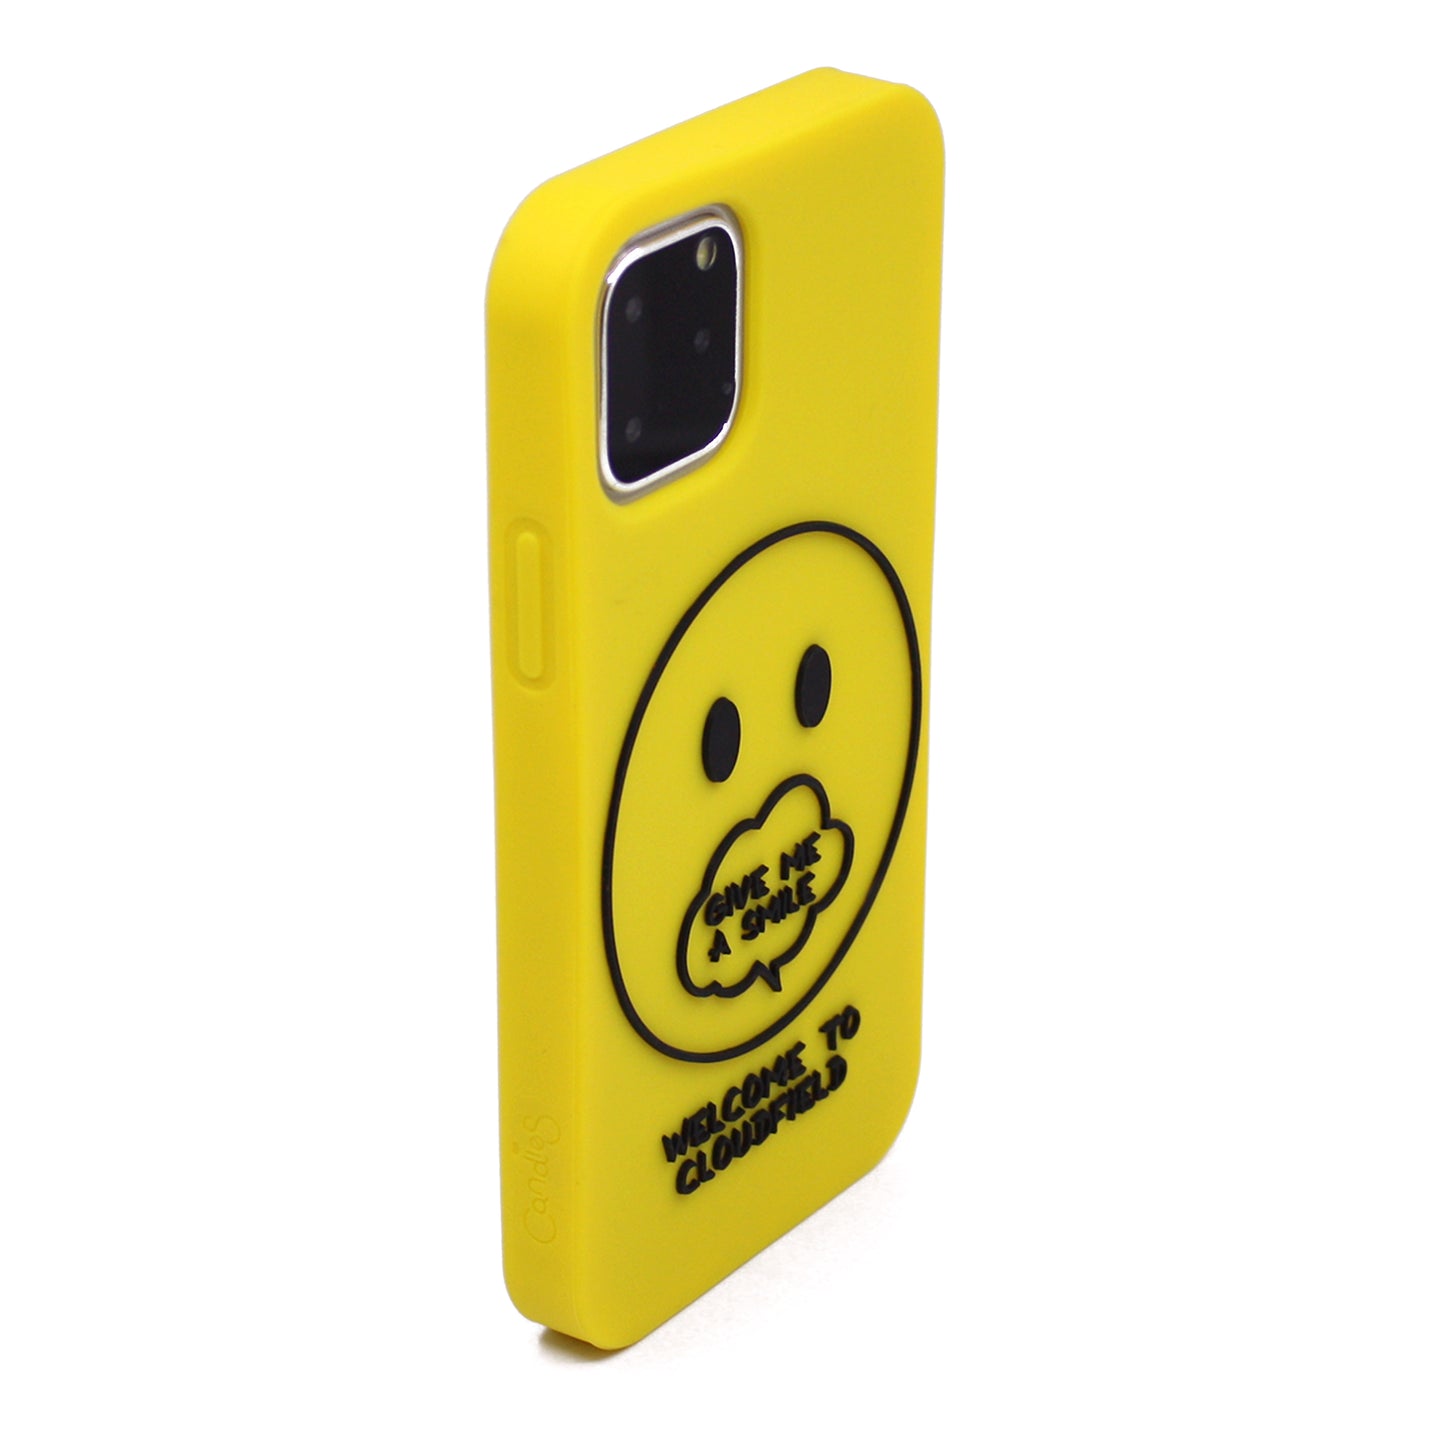 iPhone 11 Pro Simple Case - Give Me a Smile